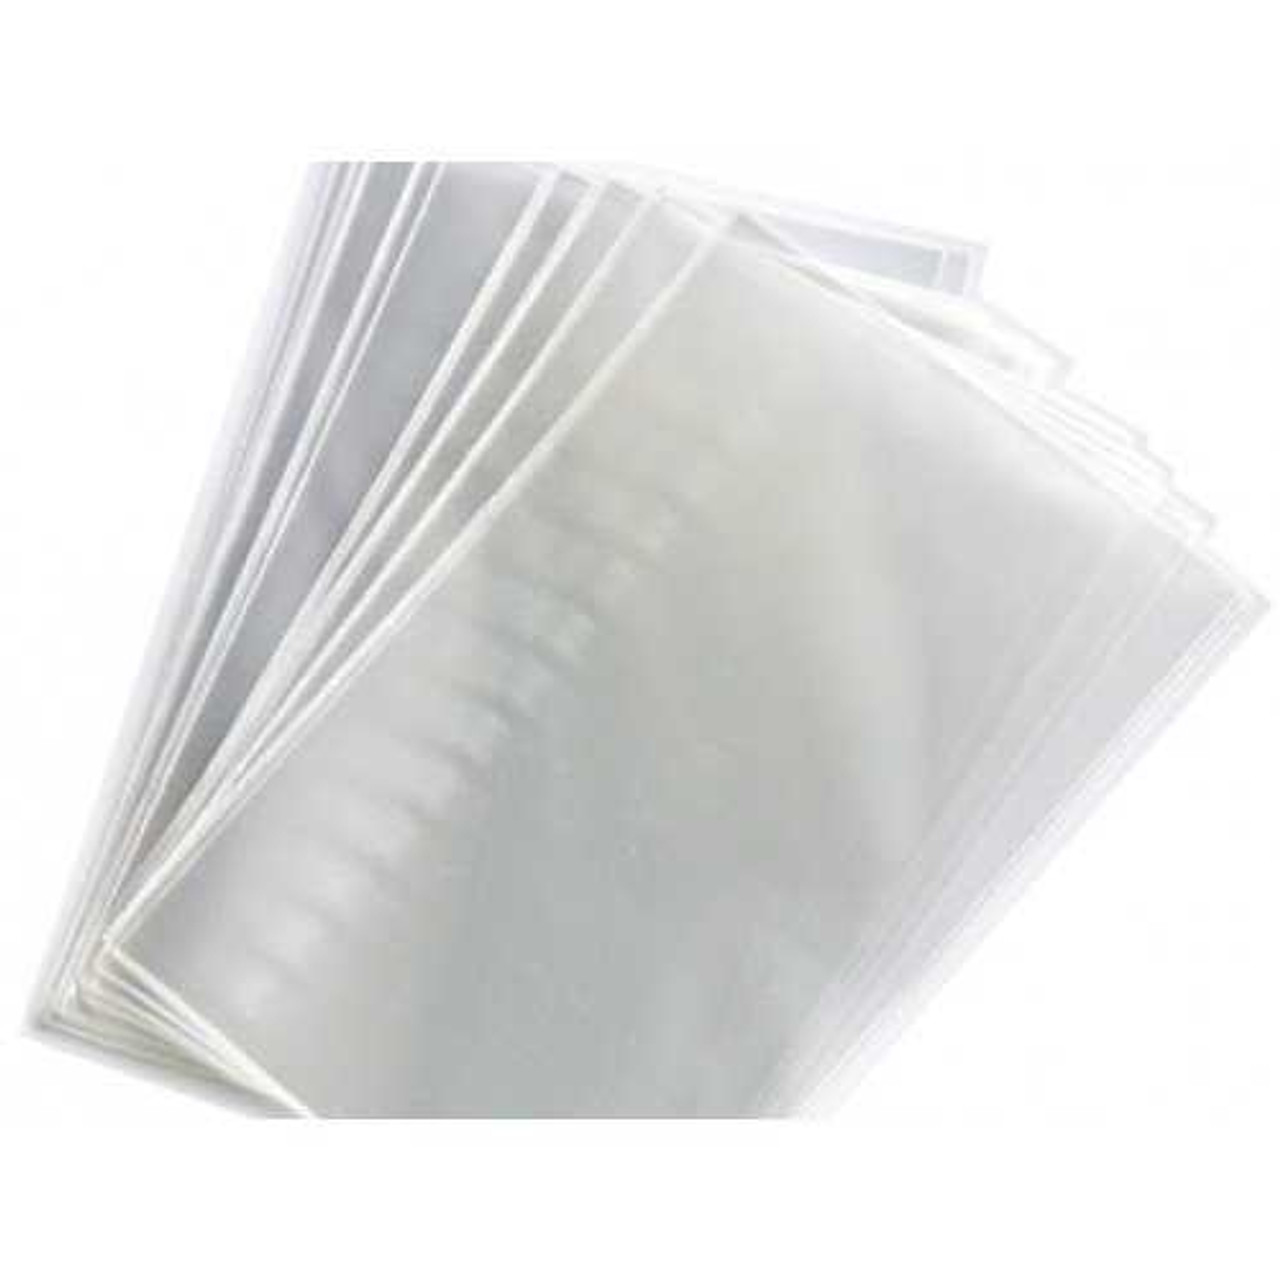 https://cdn11.bigcommerce.com/s-1ybtx/images/stencil/1280x1280/products/260/5345/100-pcs-3x5-12-15-Mil-Flat-Clear-Poly-Bags-Crystal-Clear-Bags-Cello-heat-seal_619__35696.1699987706.jpg?c=2?imbypass=on